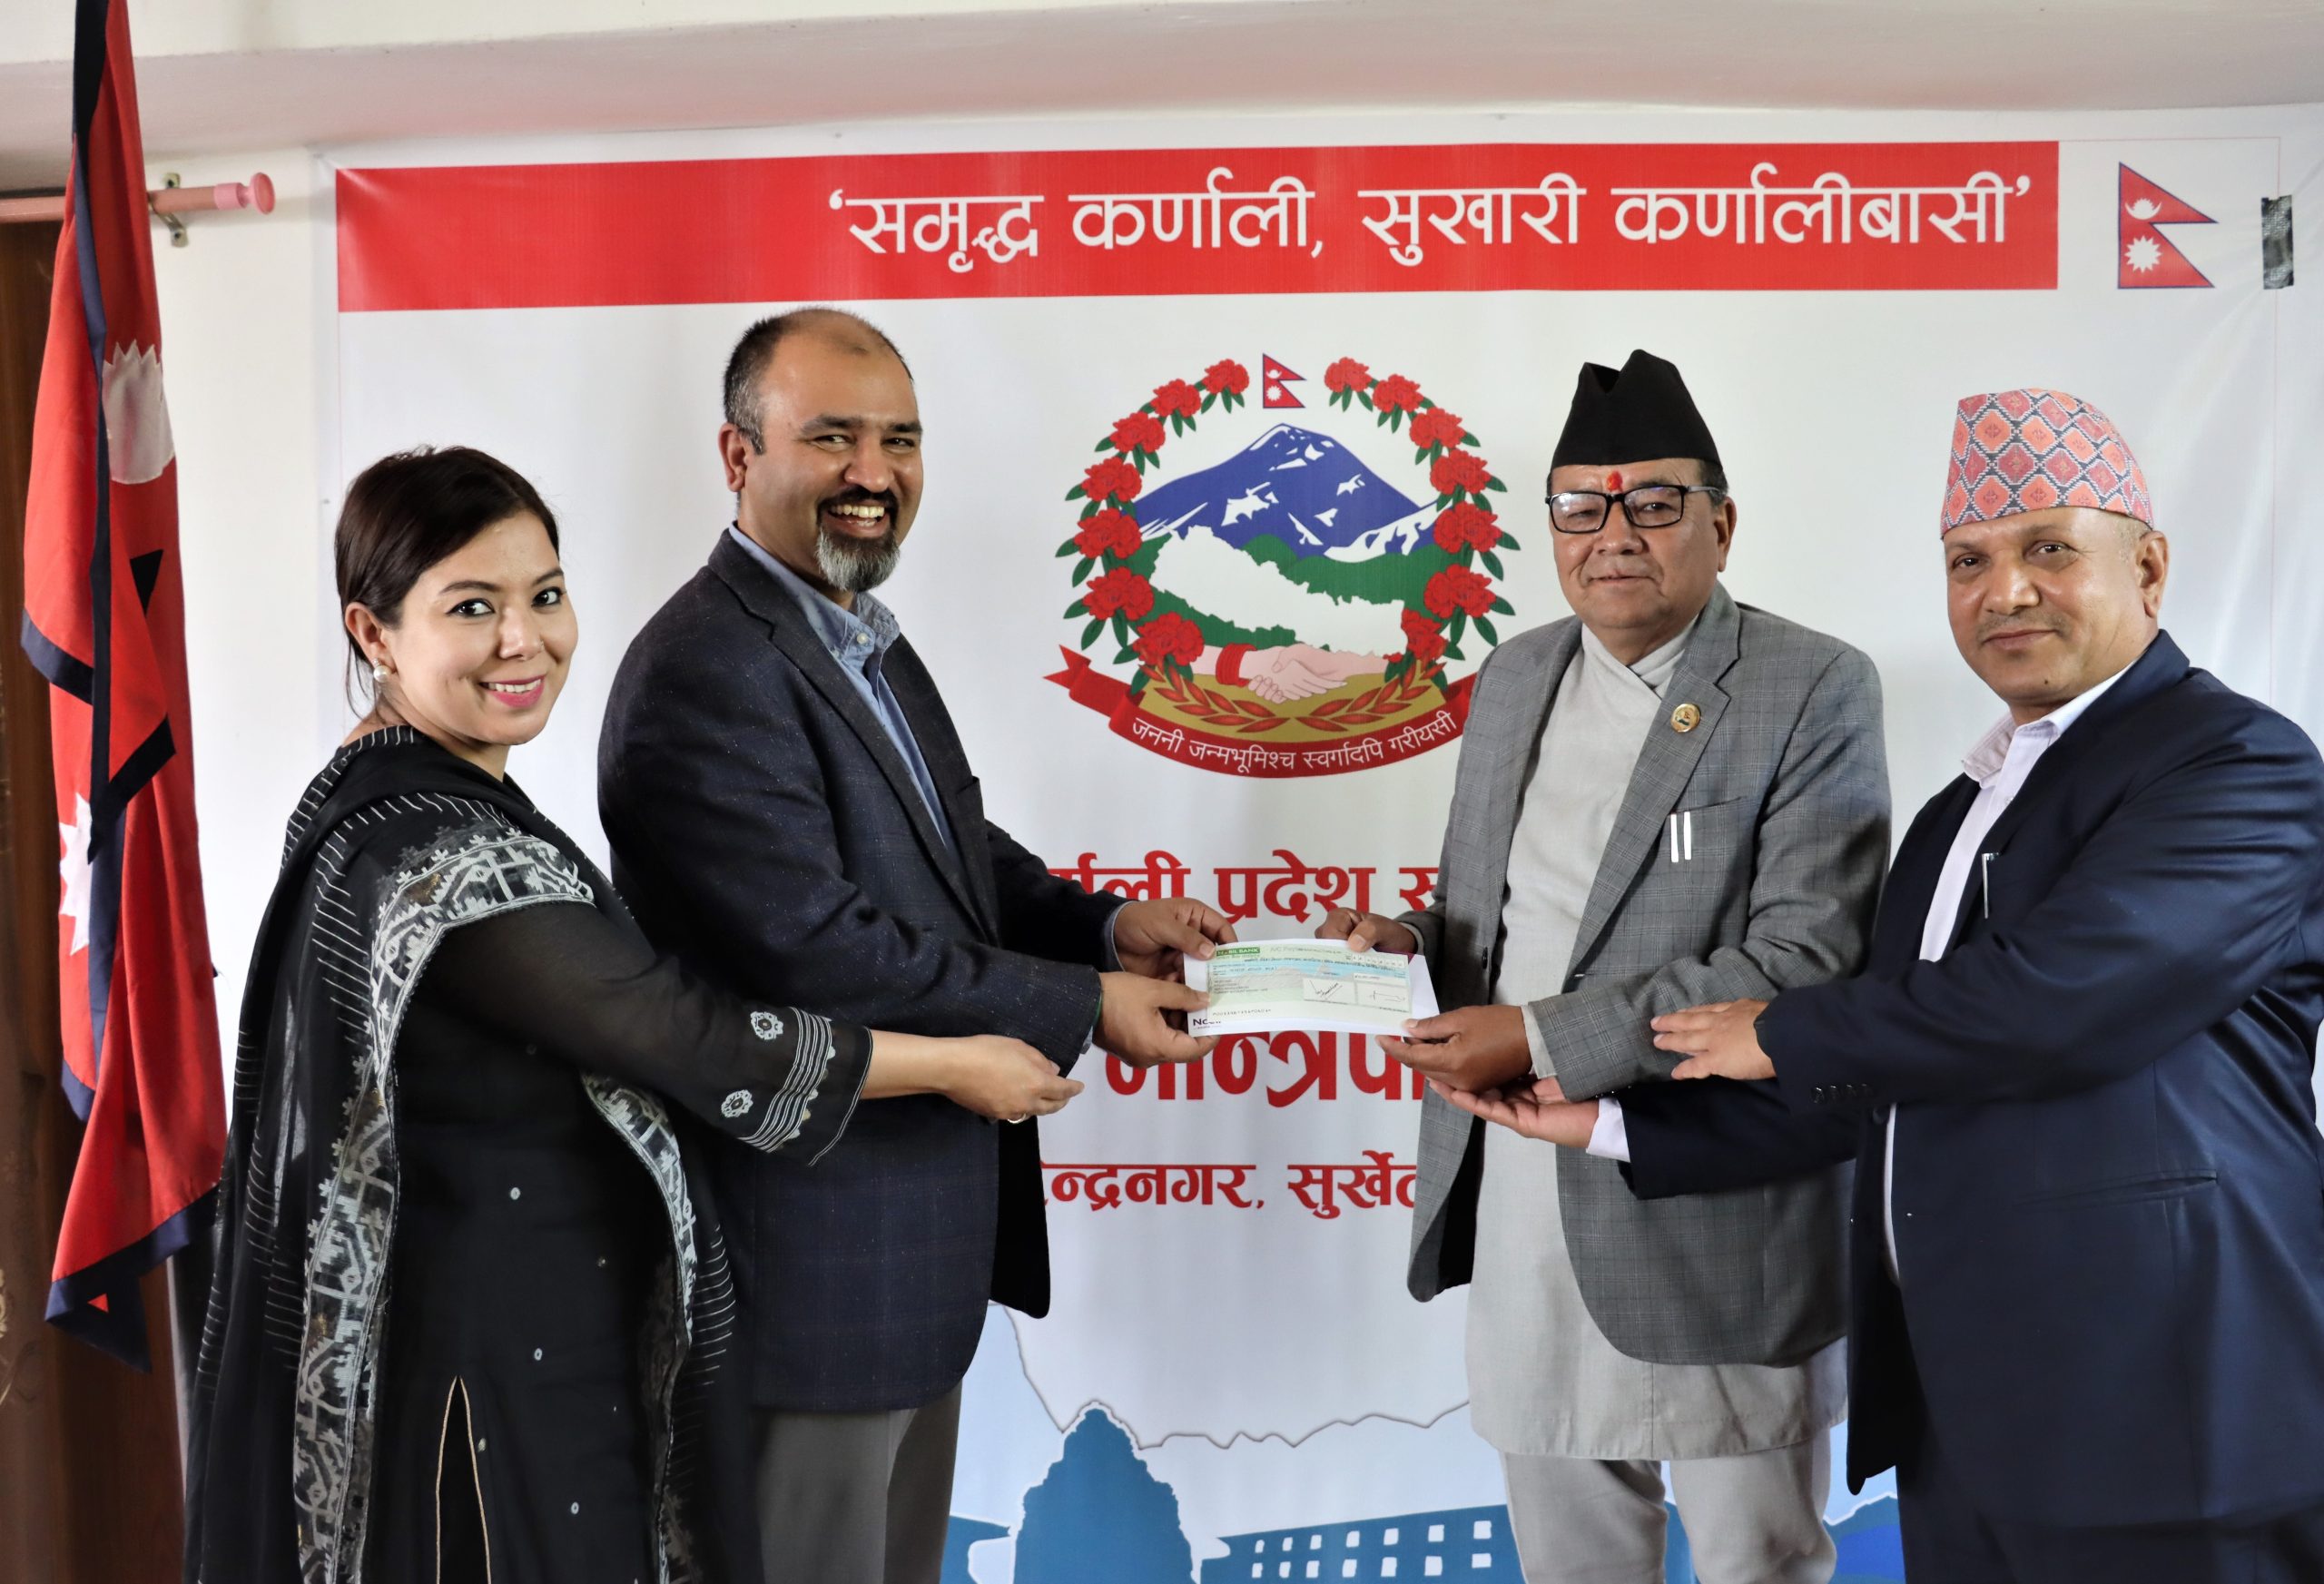 Ncell hands over its support of Rs. 50 lakhs to the Provincial Government of Karnali in Surkhet